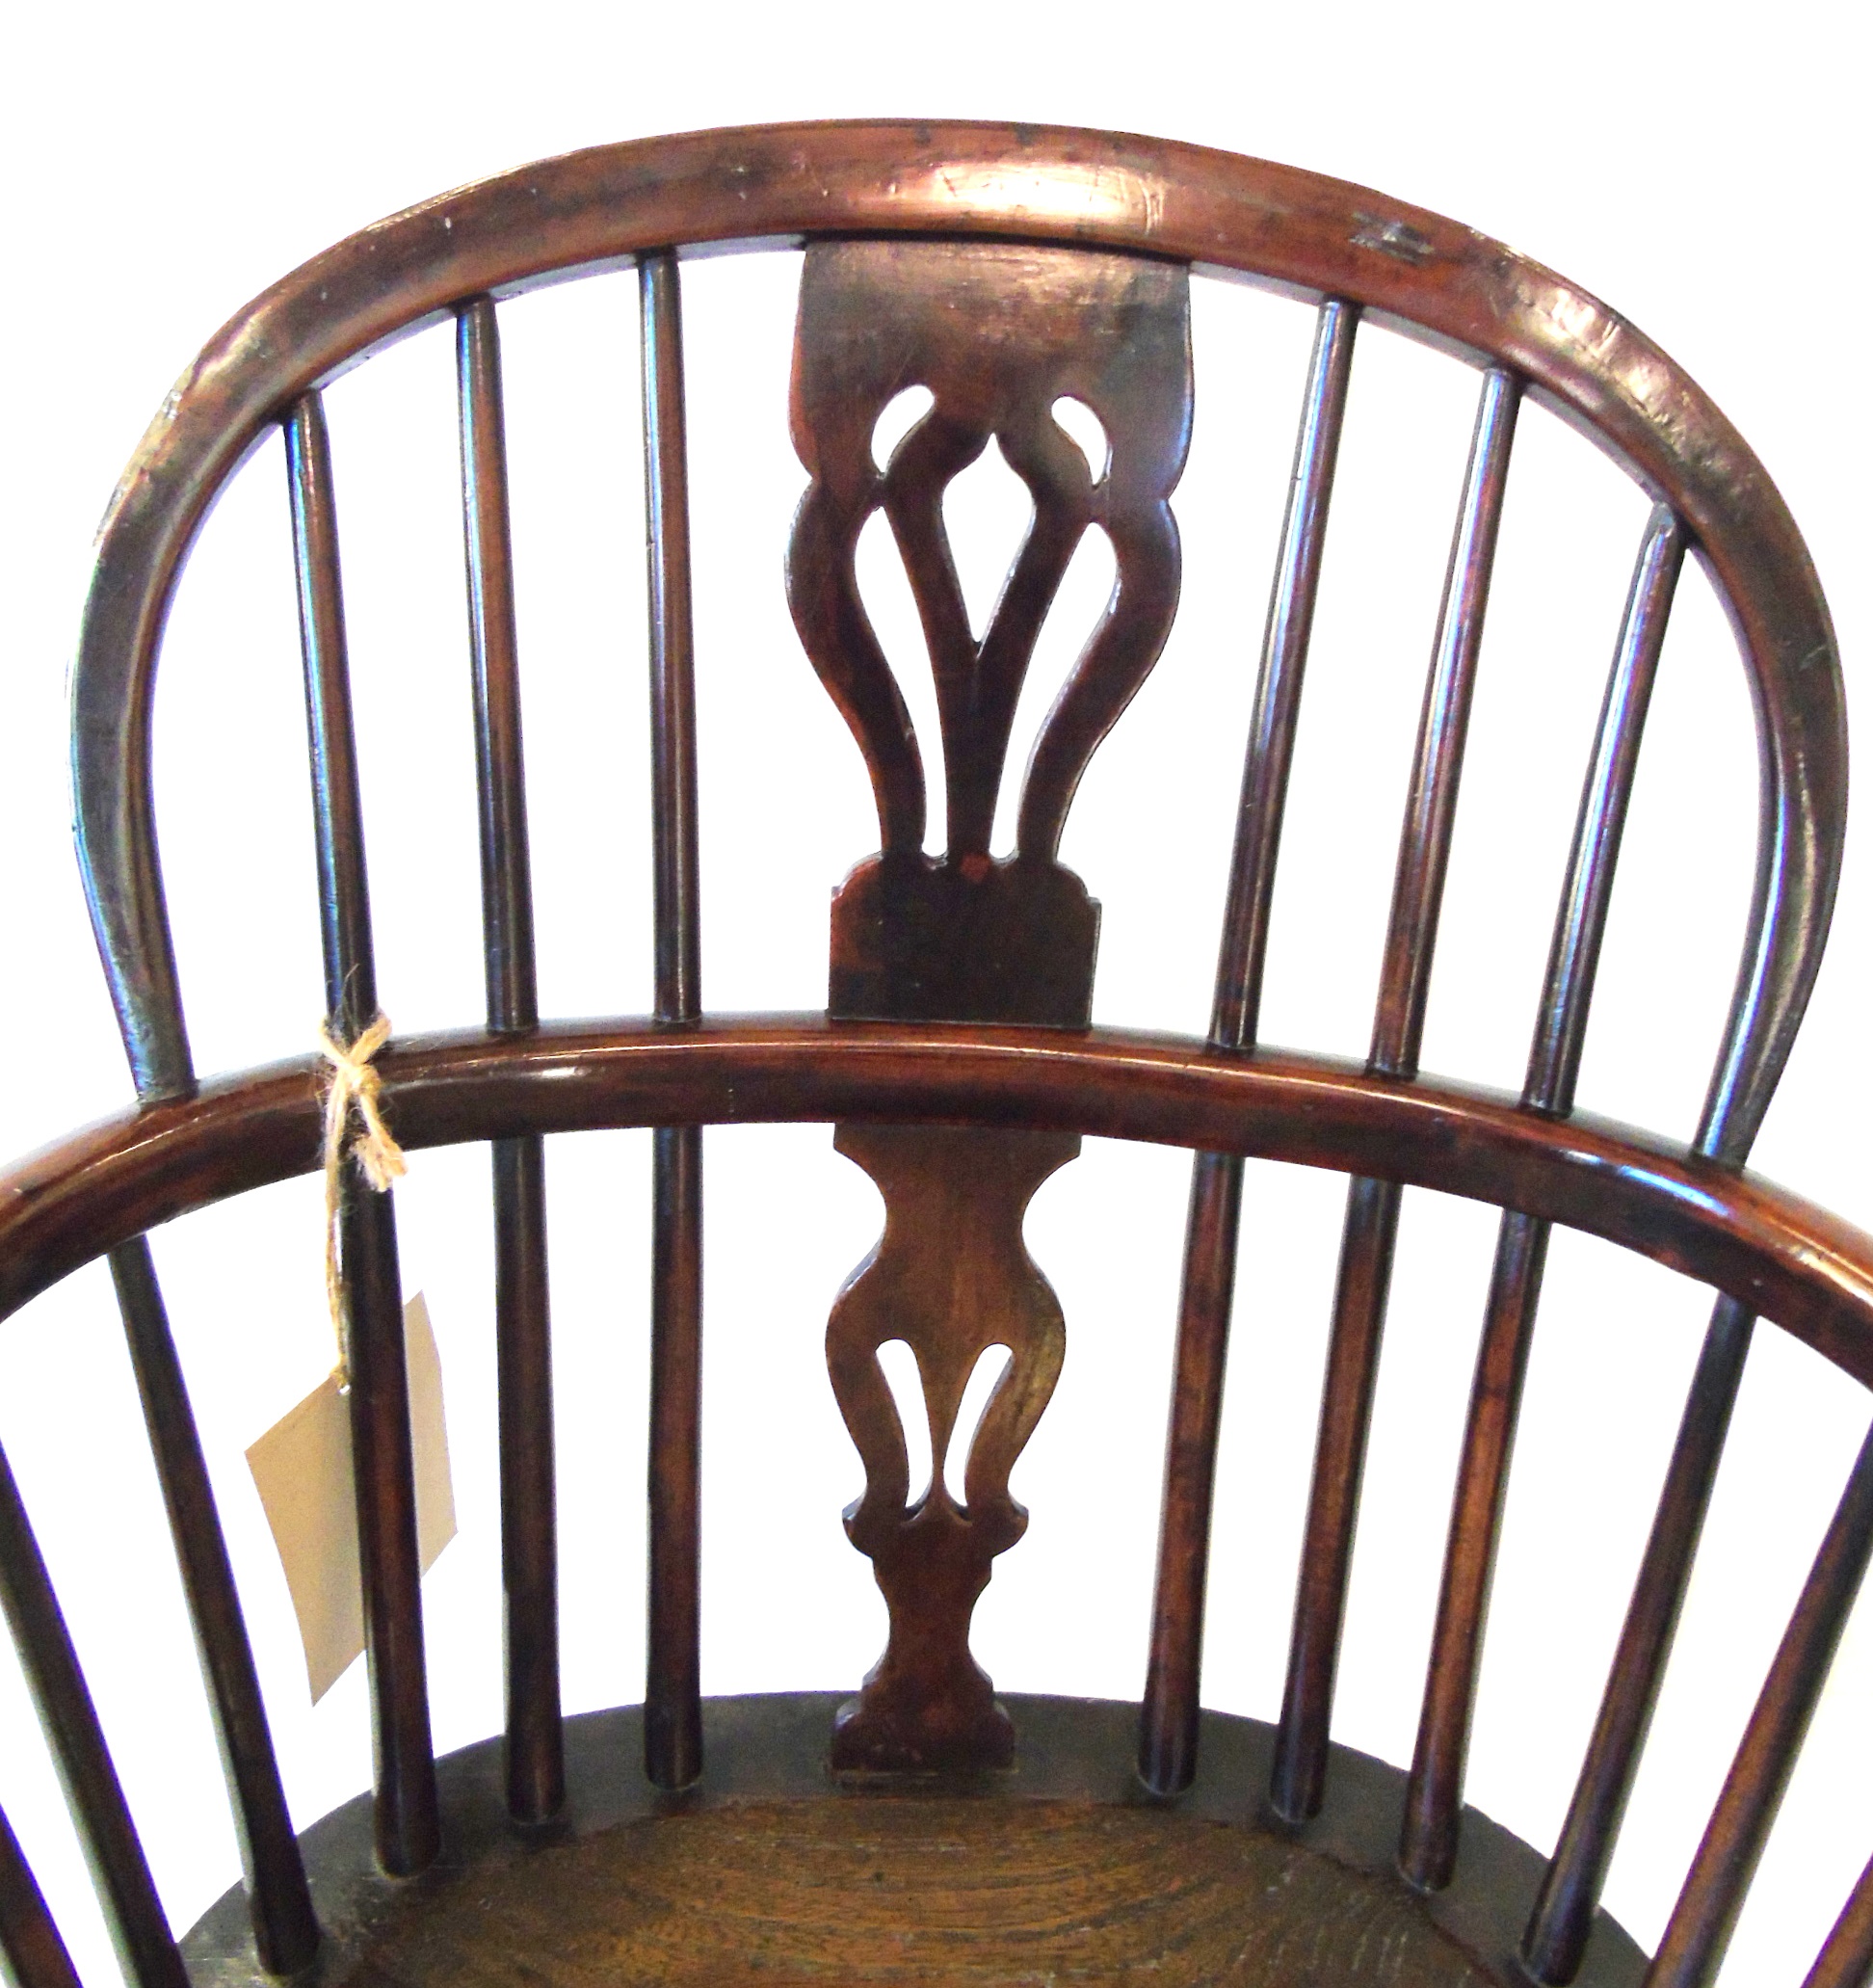 Early 19th century yew and elm low-back Windsor chair - Image 3 of 9